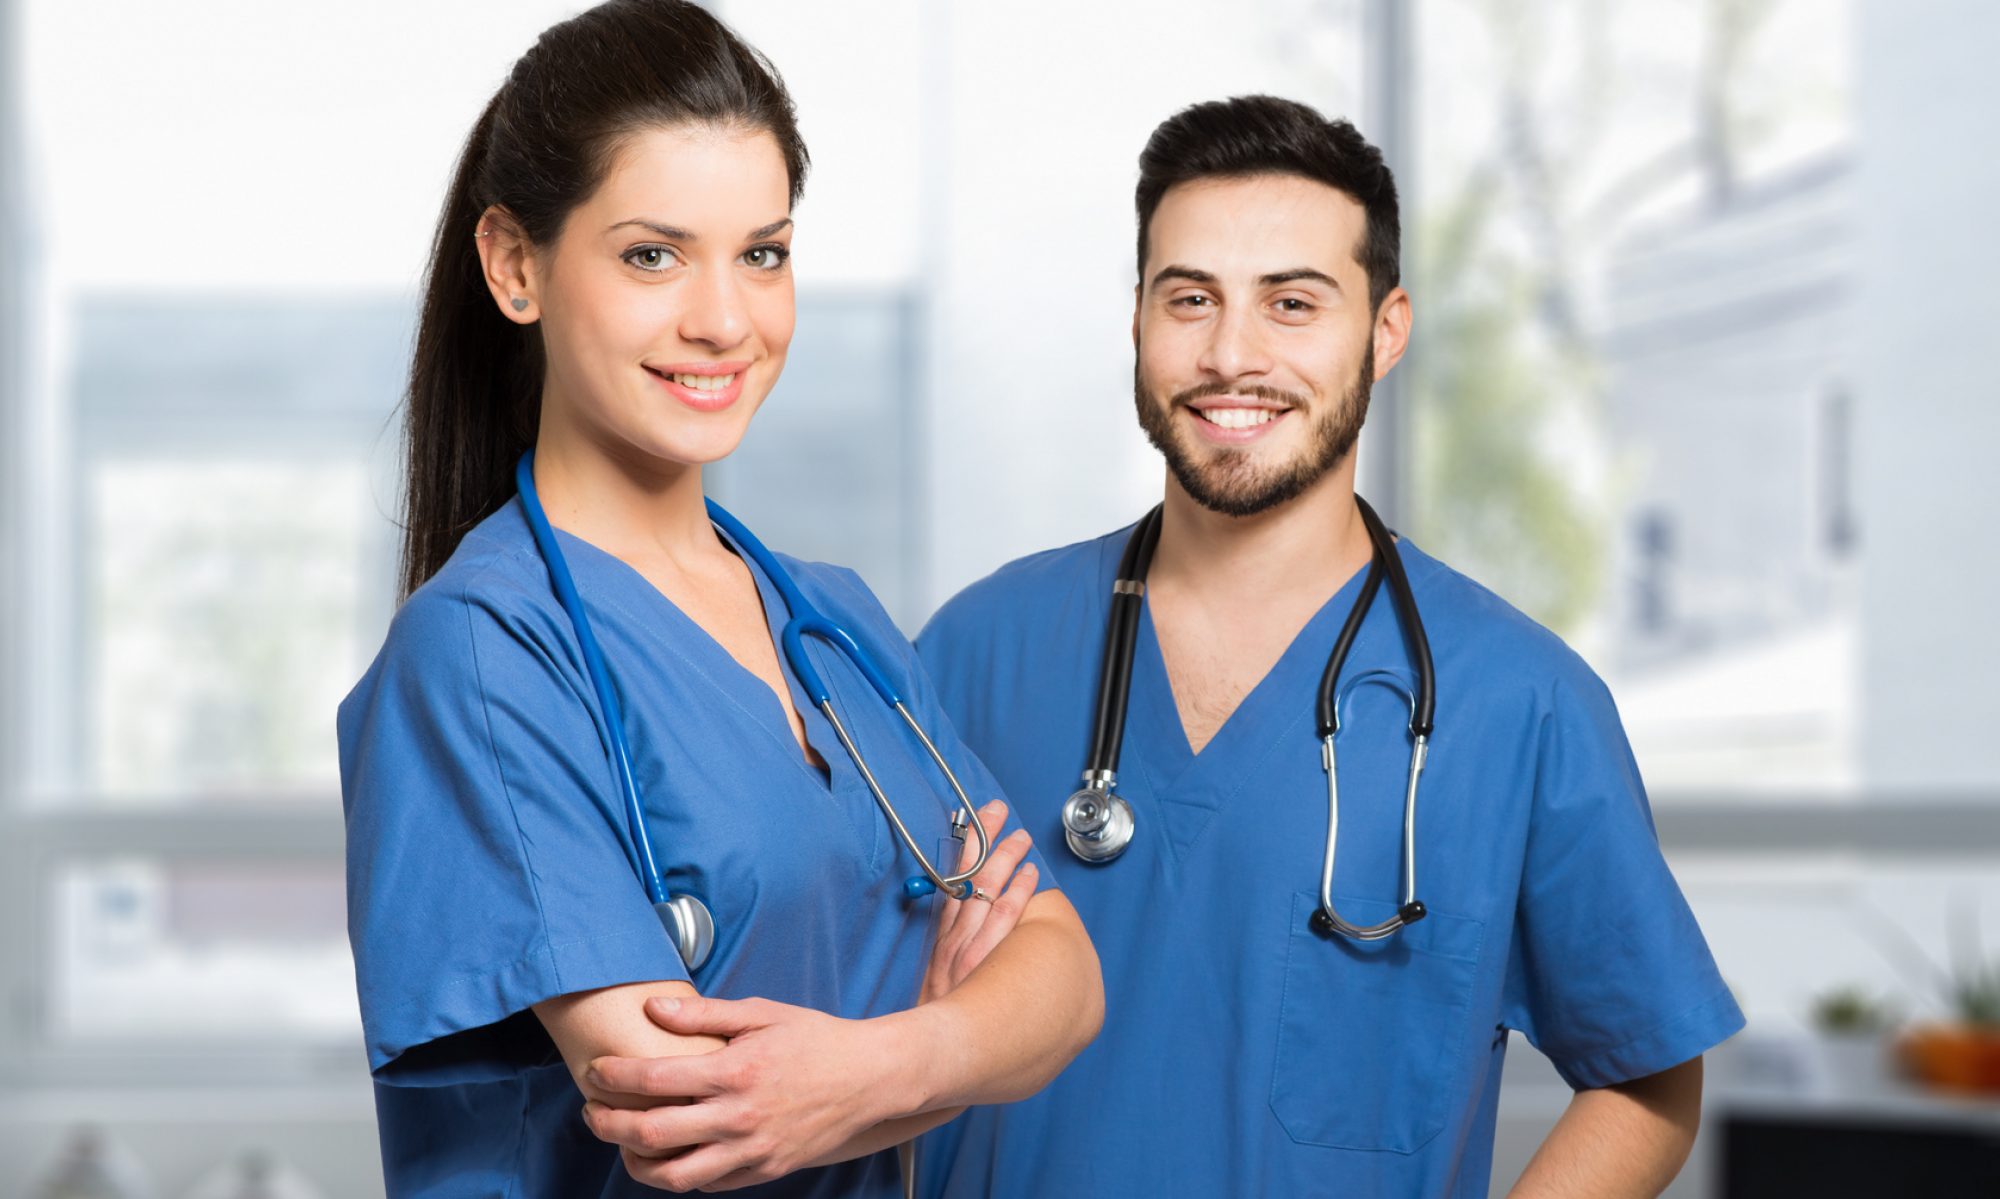 How Shadowing Can Help in Your Search for a Nursing Job